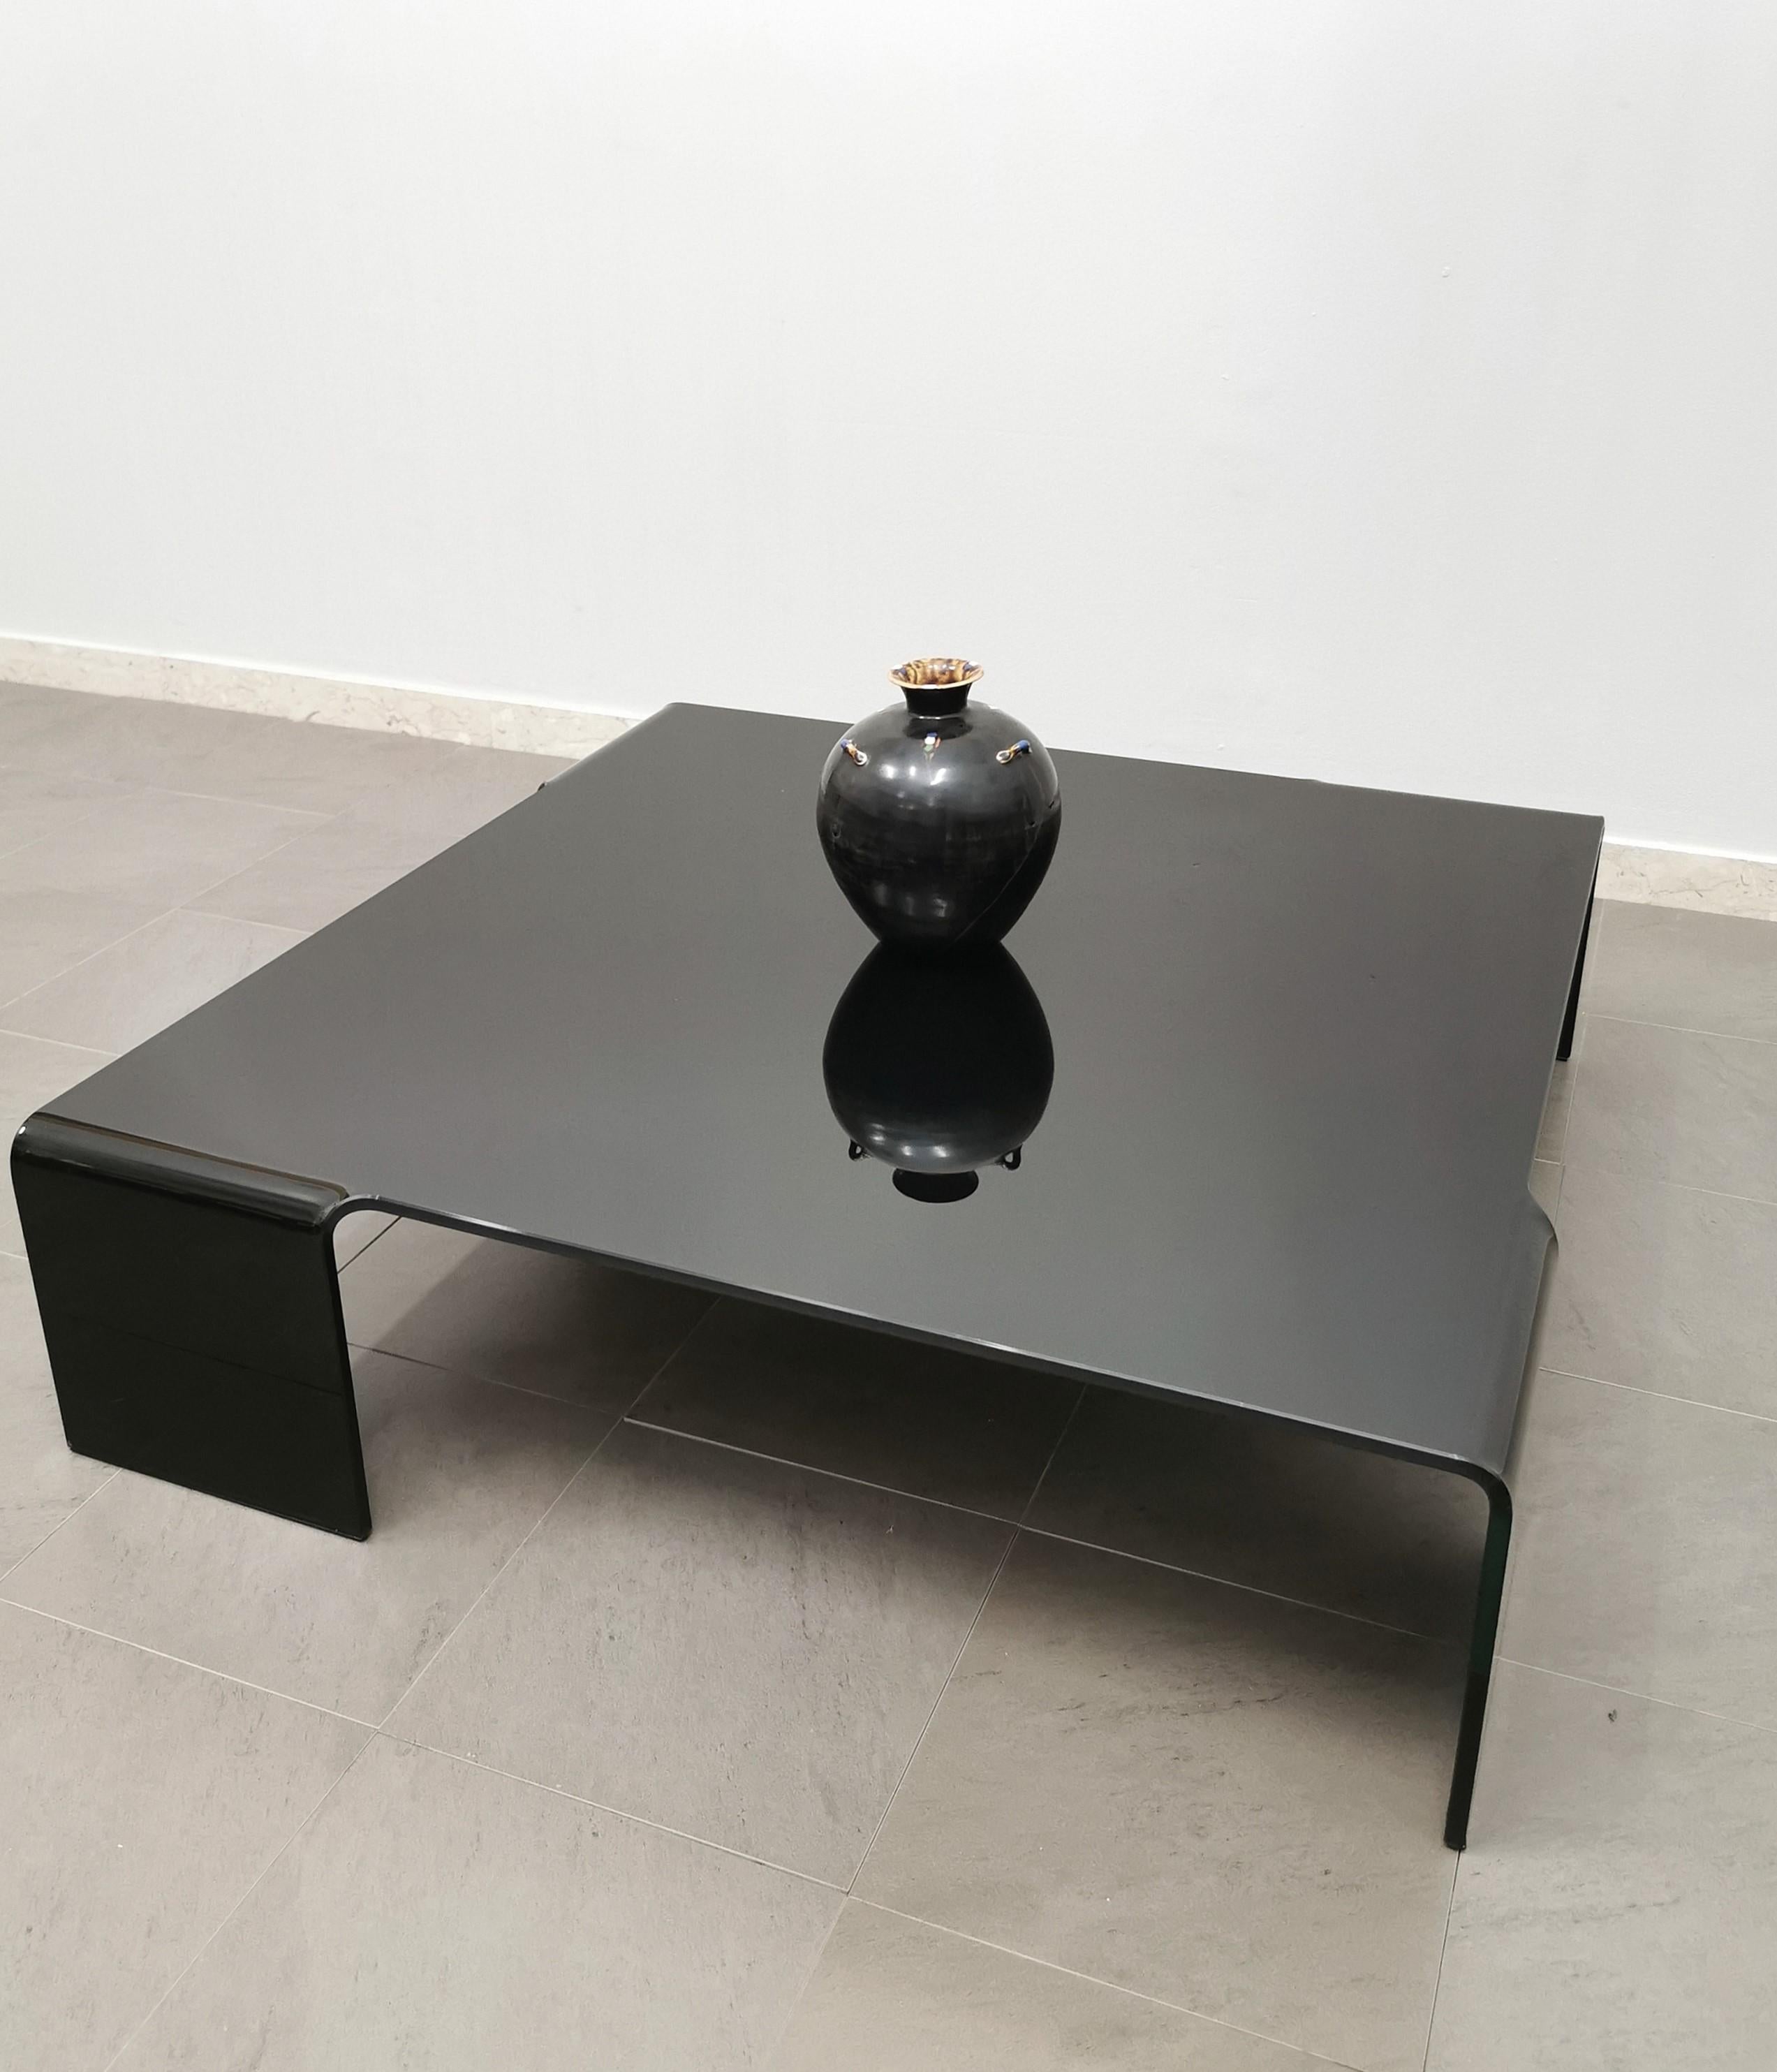 Very elegant coffee table produced in Italy in the 80's / 90's by the FIAM company. the 4-foot coffee table was made with a double curved glass in the dark shade.